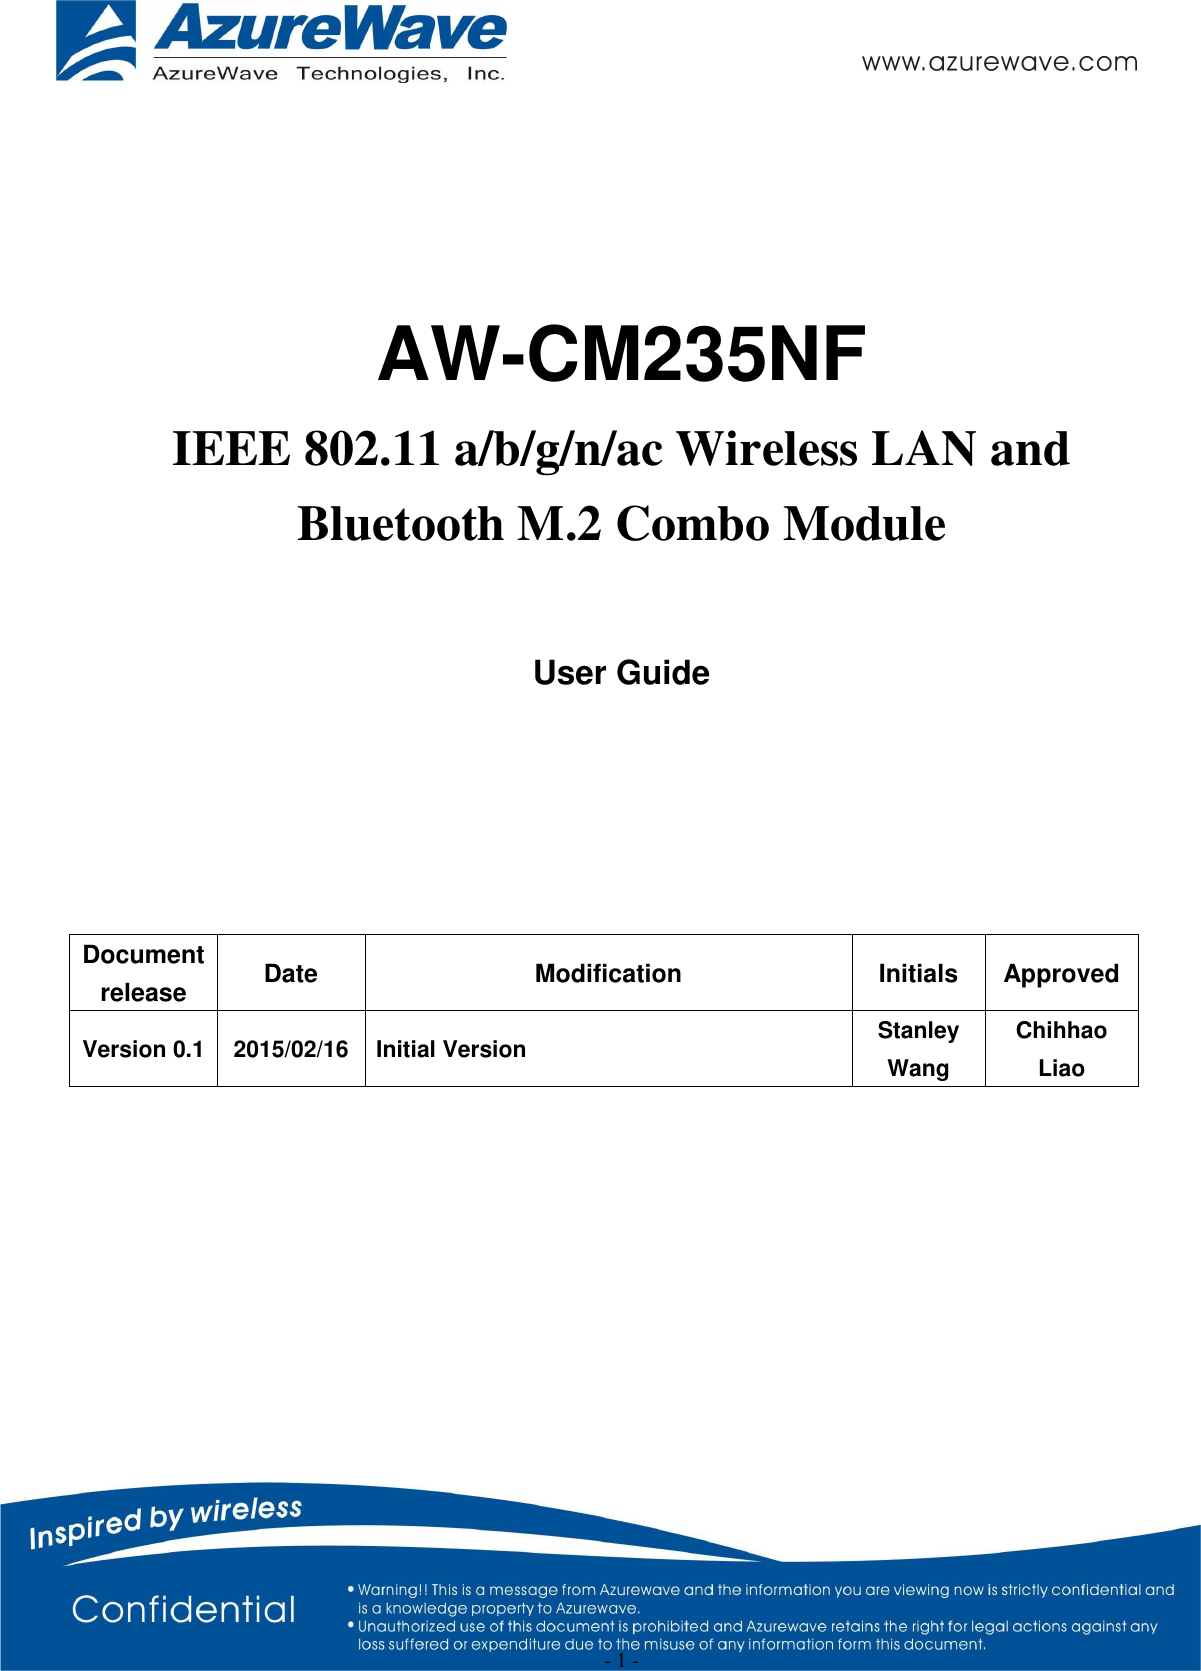  - 1 -   AW-CM235NF IEEE 802.11 a/b/g/n/ac Wireless LAN and Bluetooth M.2 Combo Module  User Guide    Document release  Date  Modification  Initials  Approved Version 0.1 2015/02/16 Initial Version  Stanley Wang Chihhao Liao 